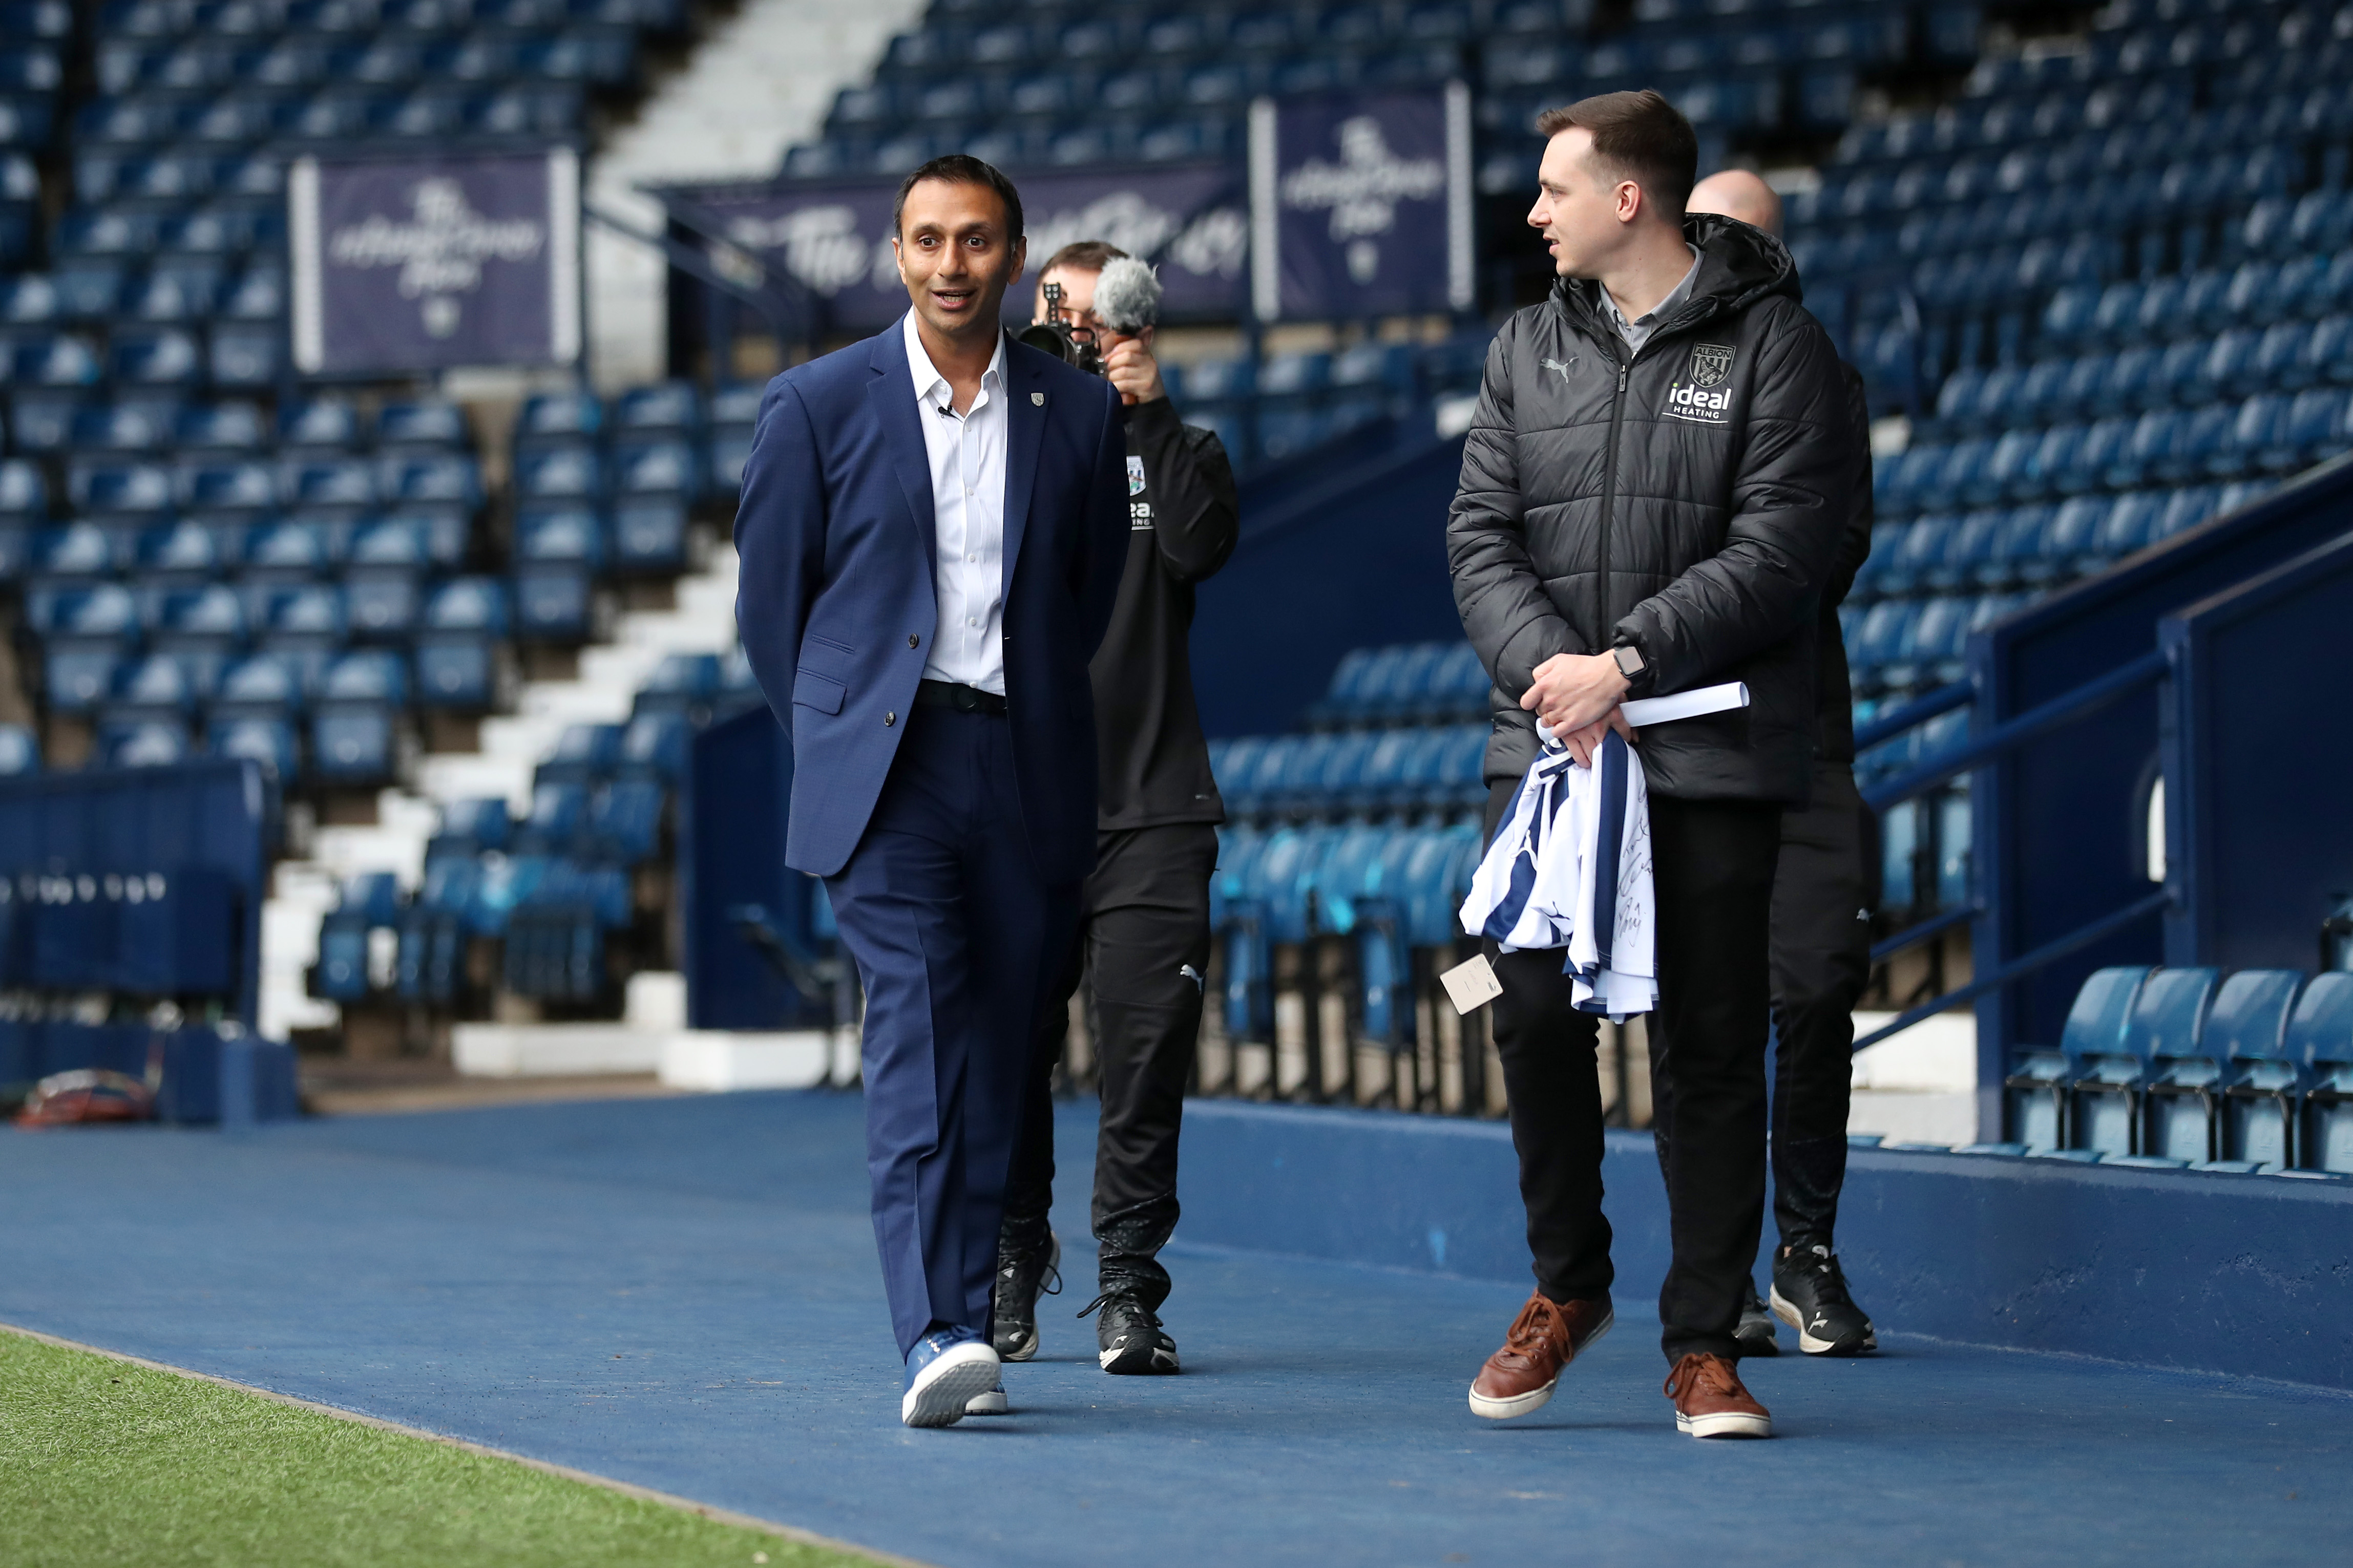 Shilen Patel walking along the blue track in front of the West Stand with West Bromwich Albion's Senior Communications Officer Sean Watts